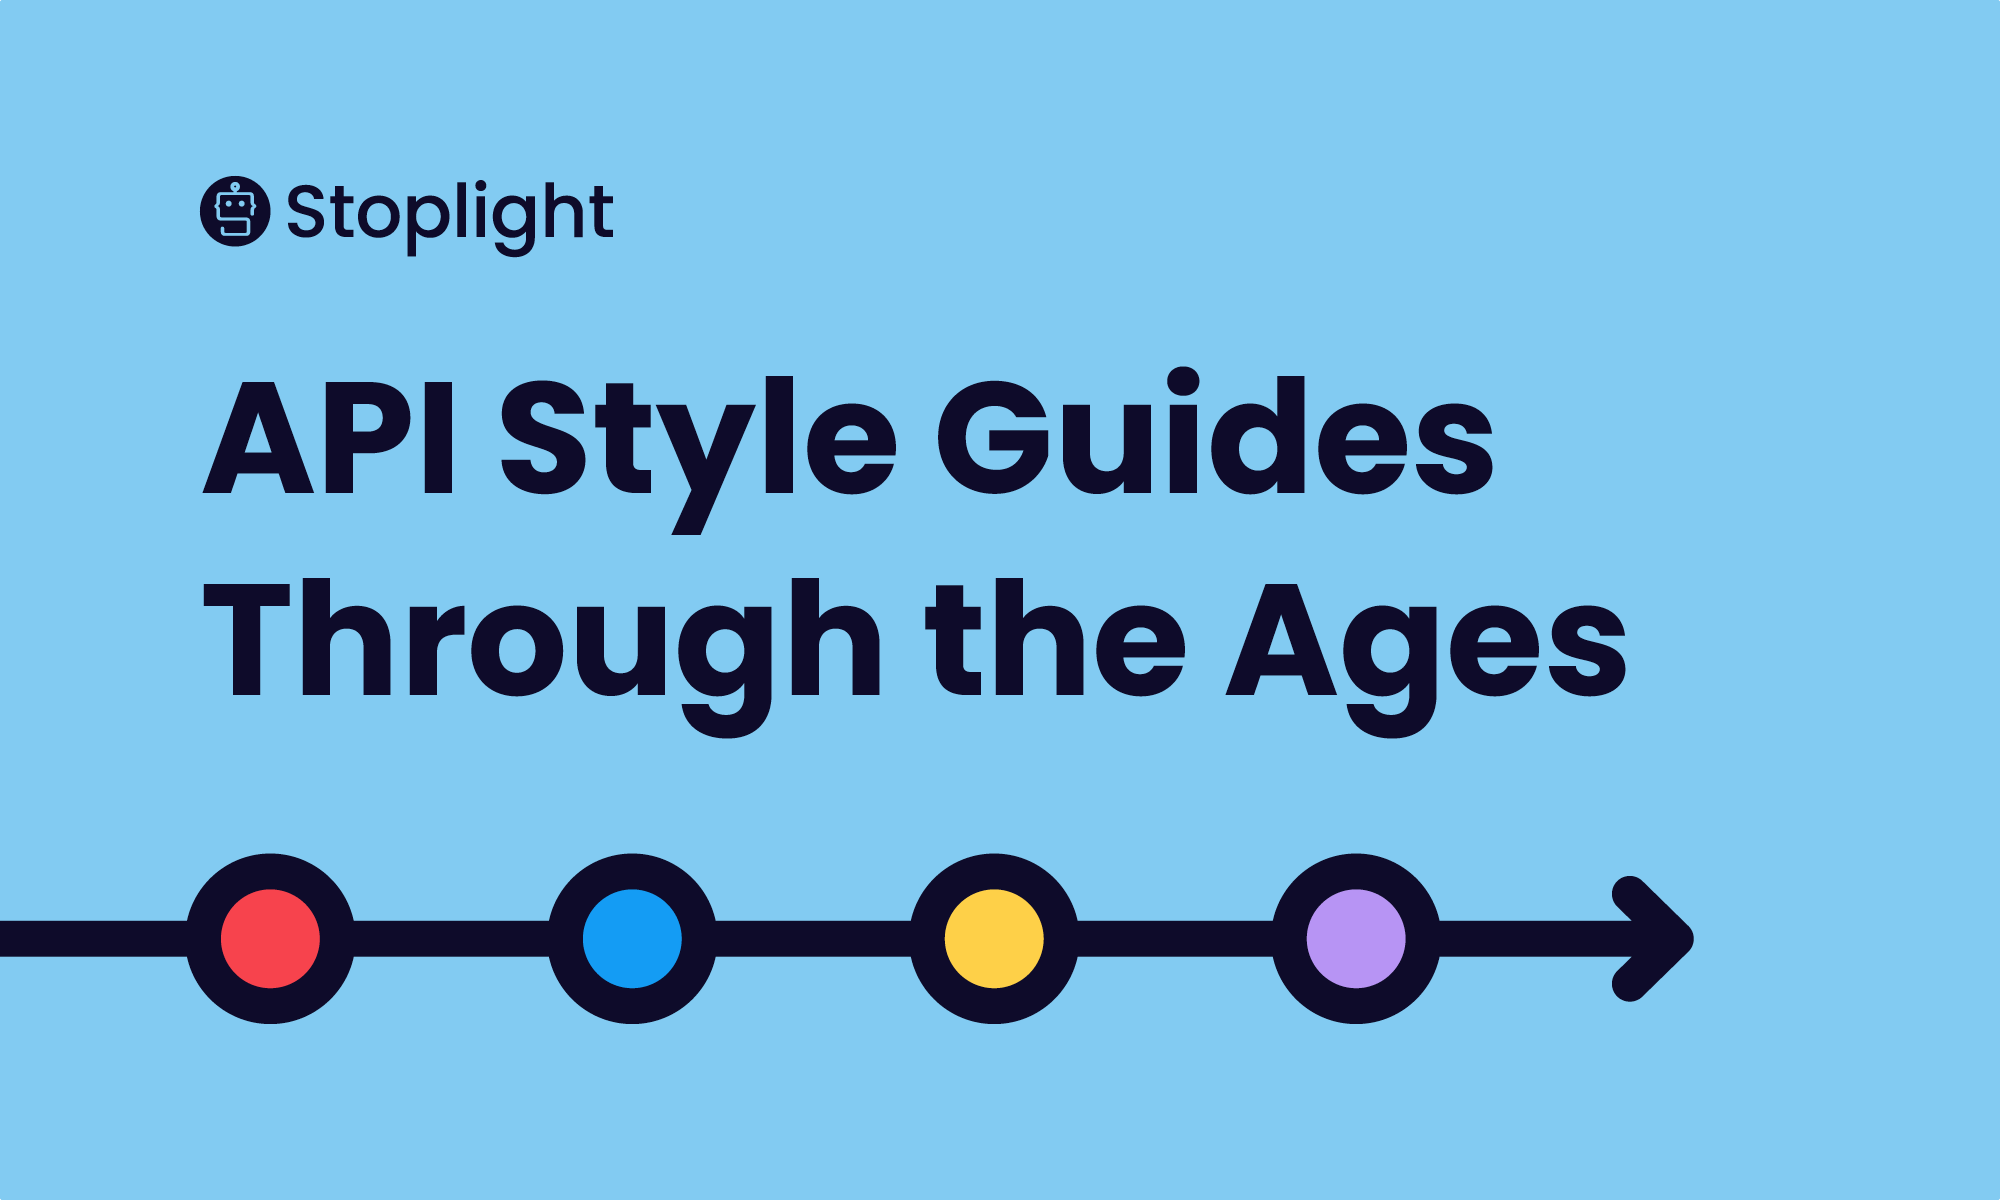 API Style Guides Through the Ages